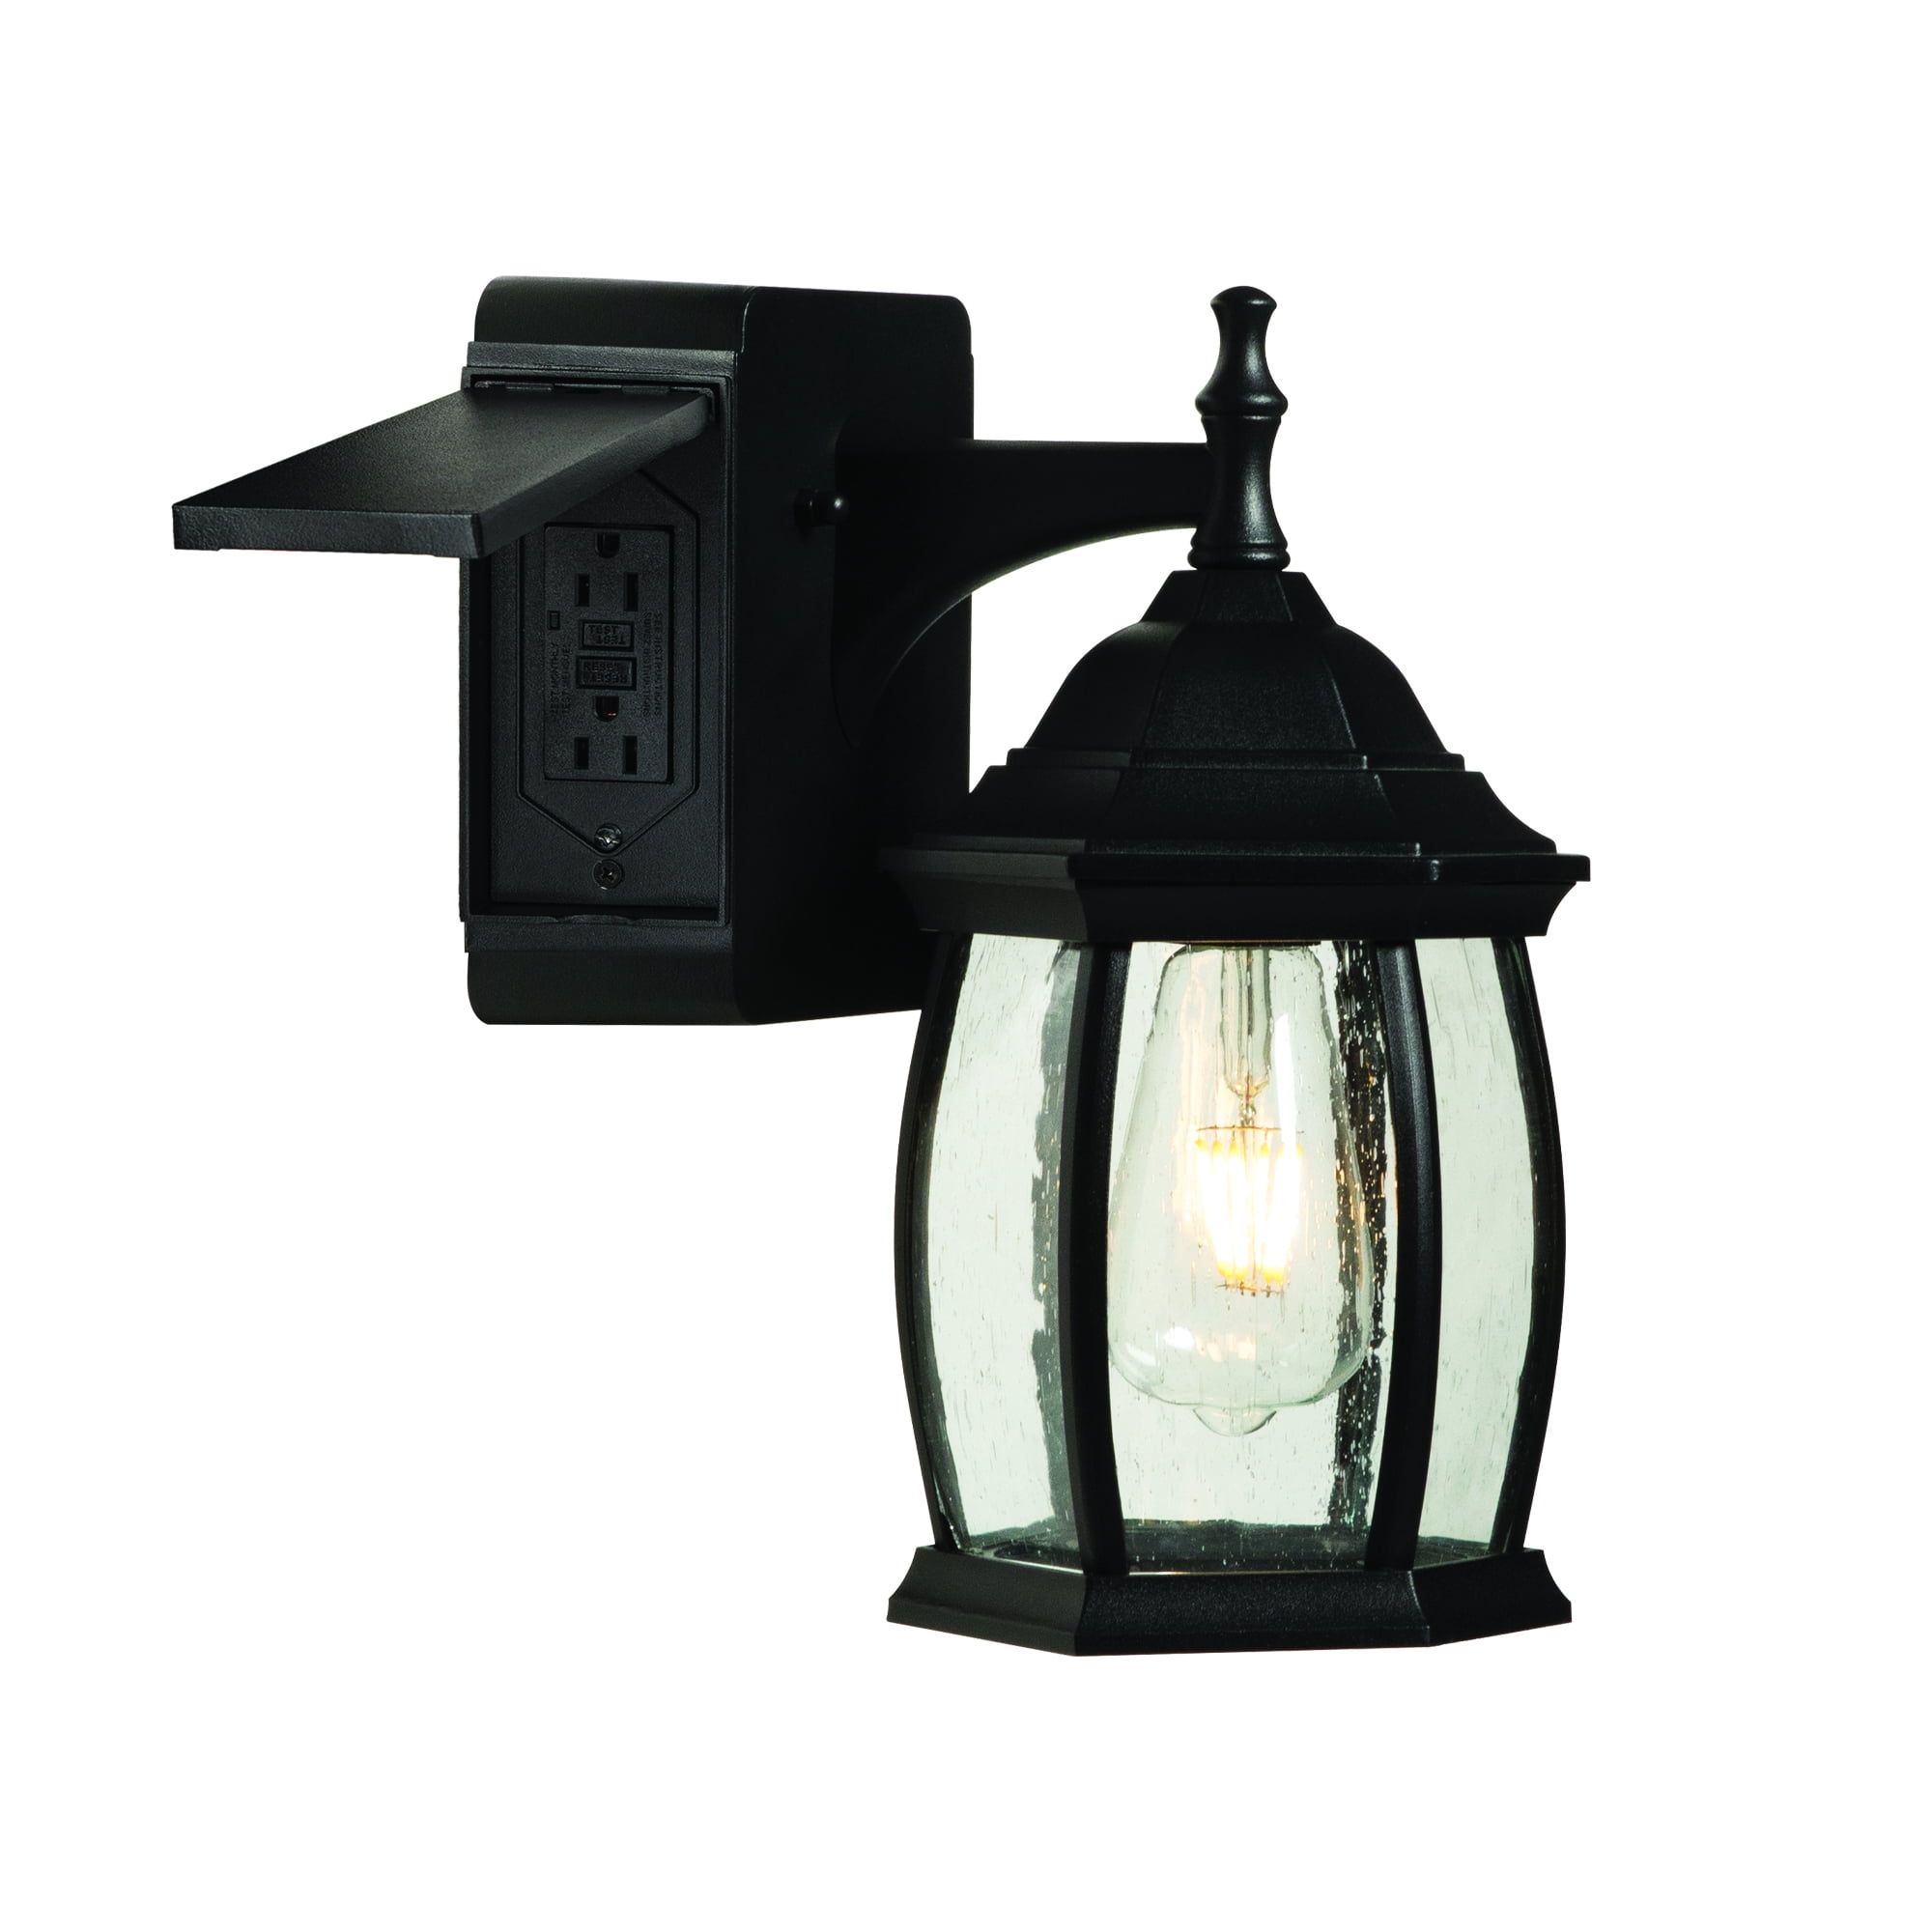 Light Outdoor Wall Lantern With, Outdoor Porch Light With Plug